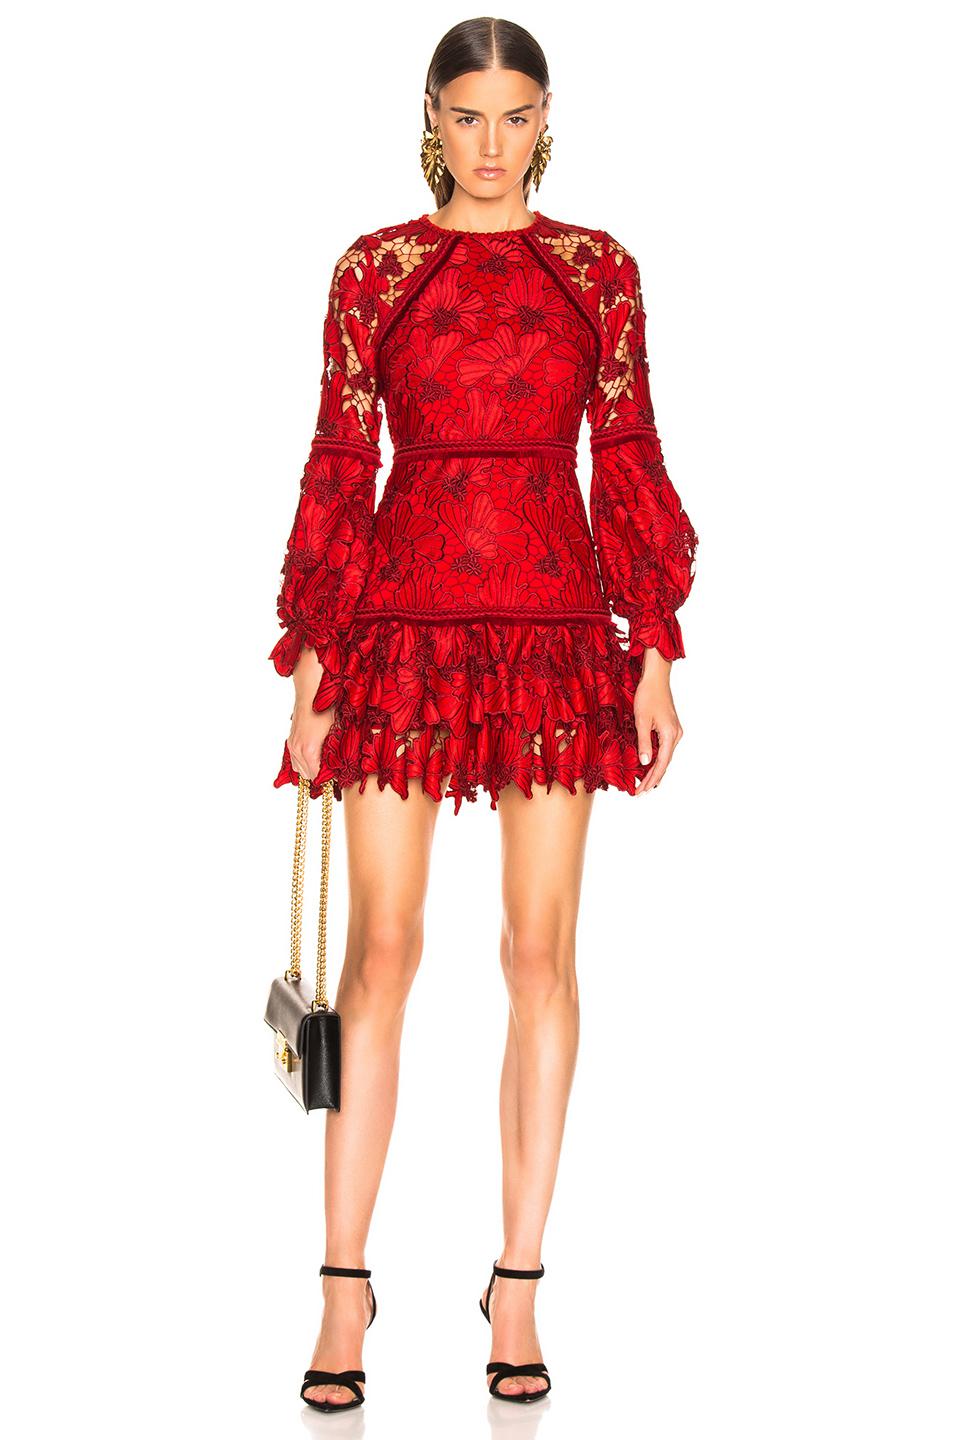 Alexis Fransisca Lace Dress in Red - Save 29% - Lyst